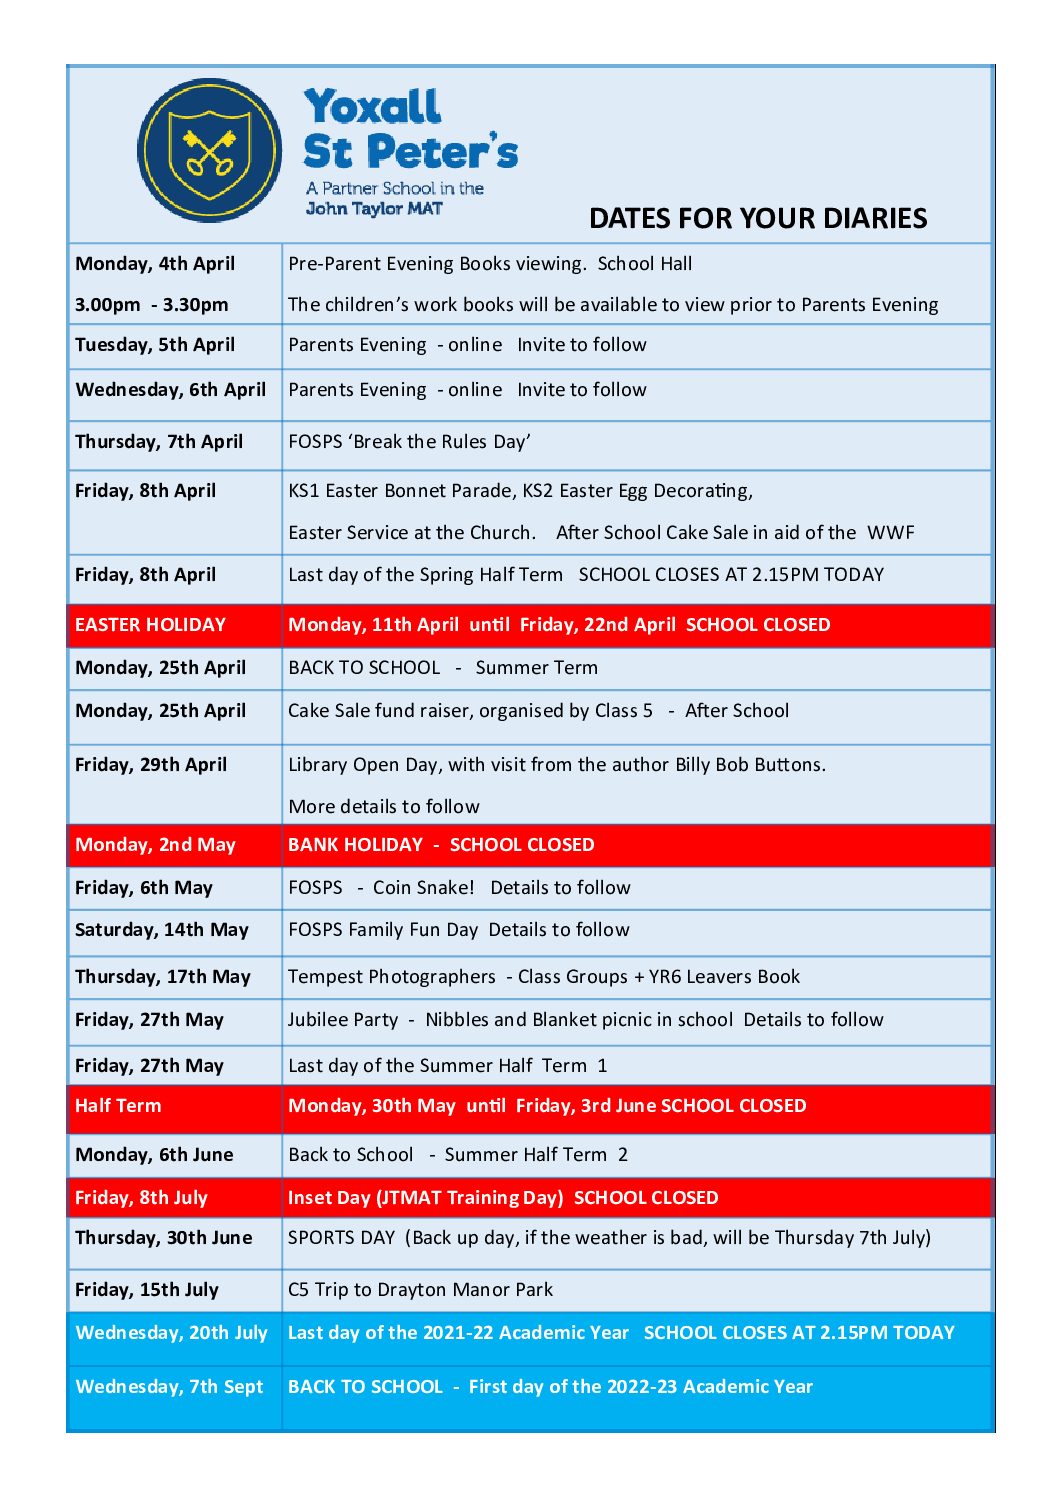 Updated – Dates for your Diaries